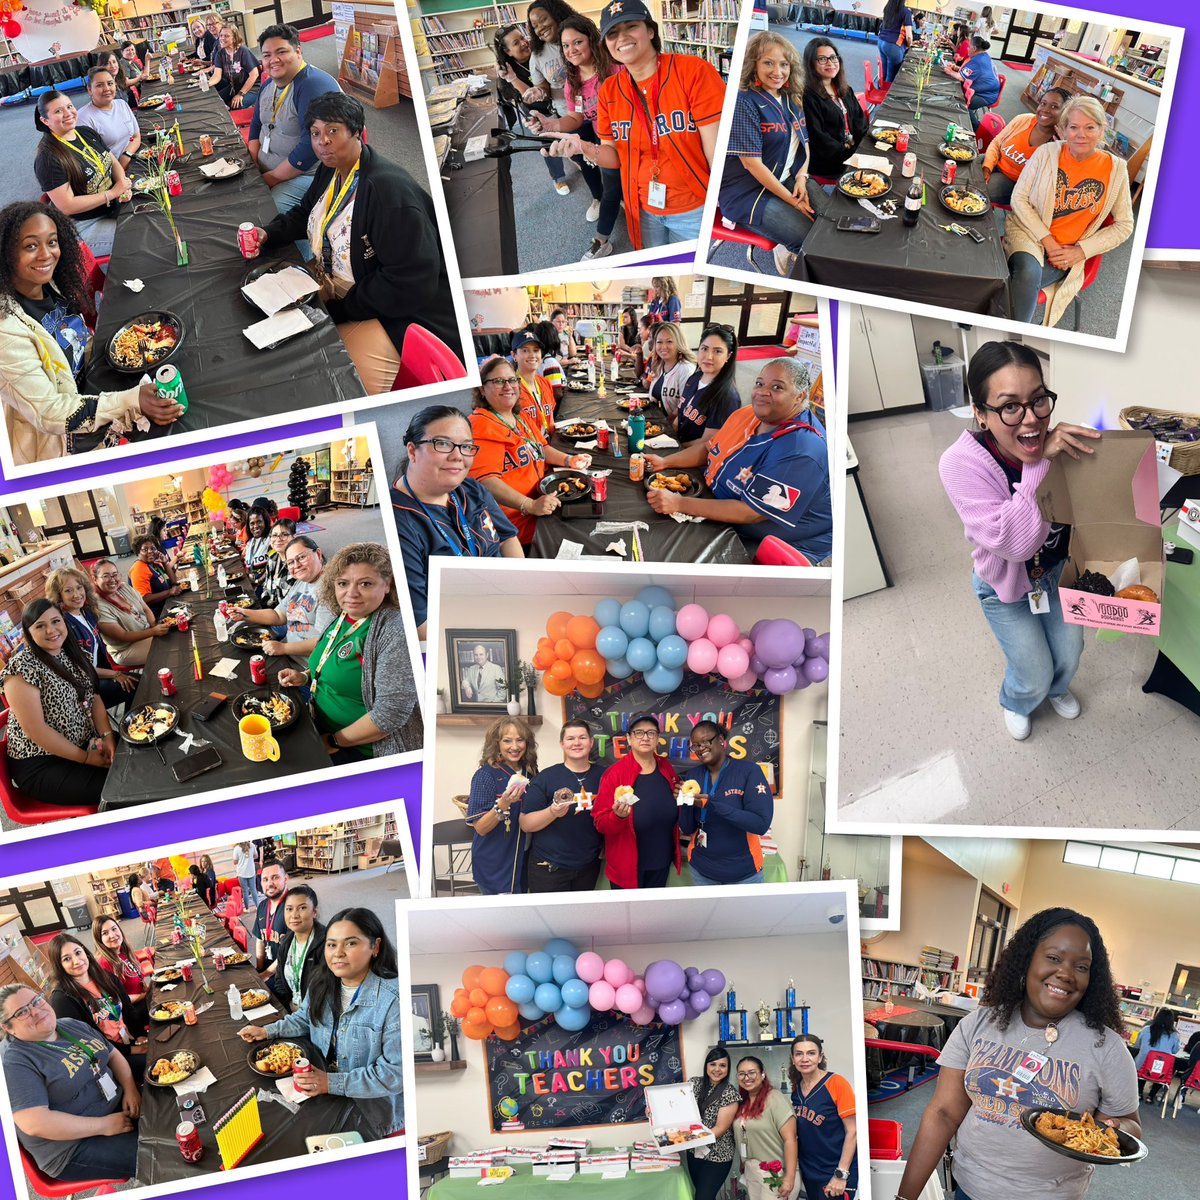 🌟 Wednesday: We enjoyed a meal from @raisingcanes and were spoiled with a table full of confections and cookies. A big thanks to Counselor Landau for sweetening our day even more with @KINDSnacks for our staff. Your thoughtfulness is greatly appreciated! 😋 🌟 Thursday: Our